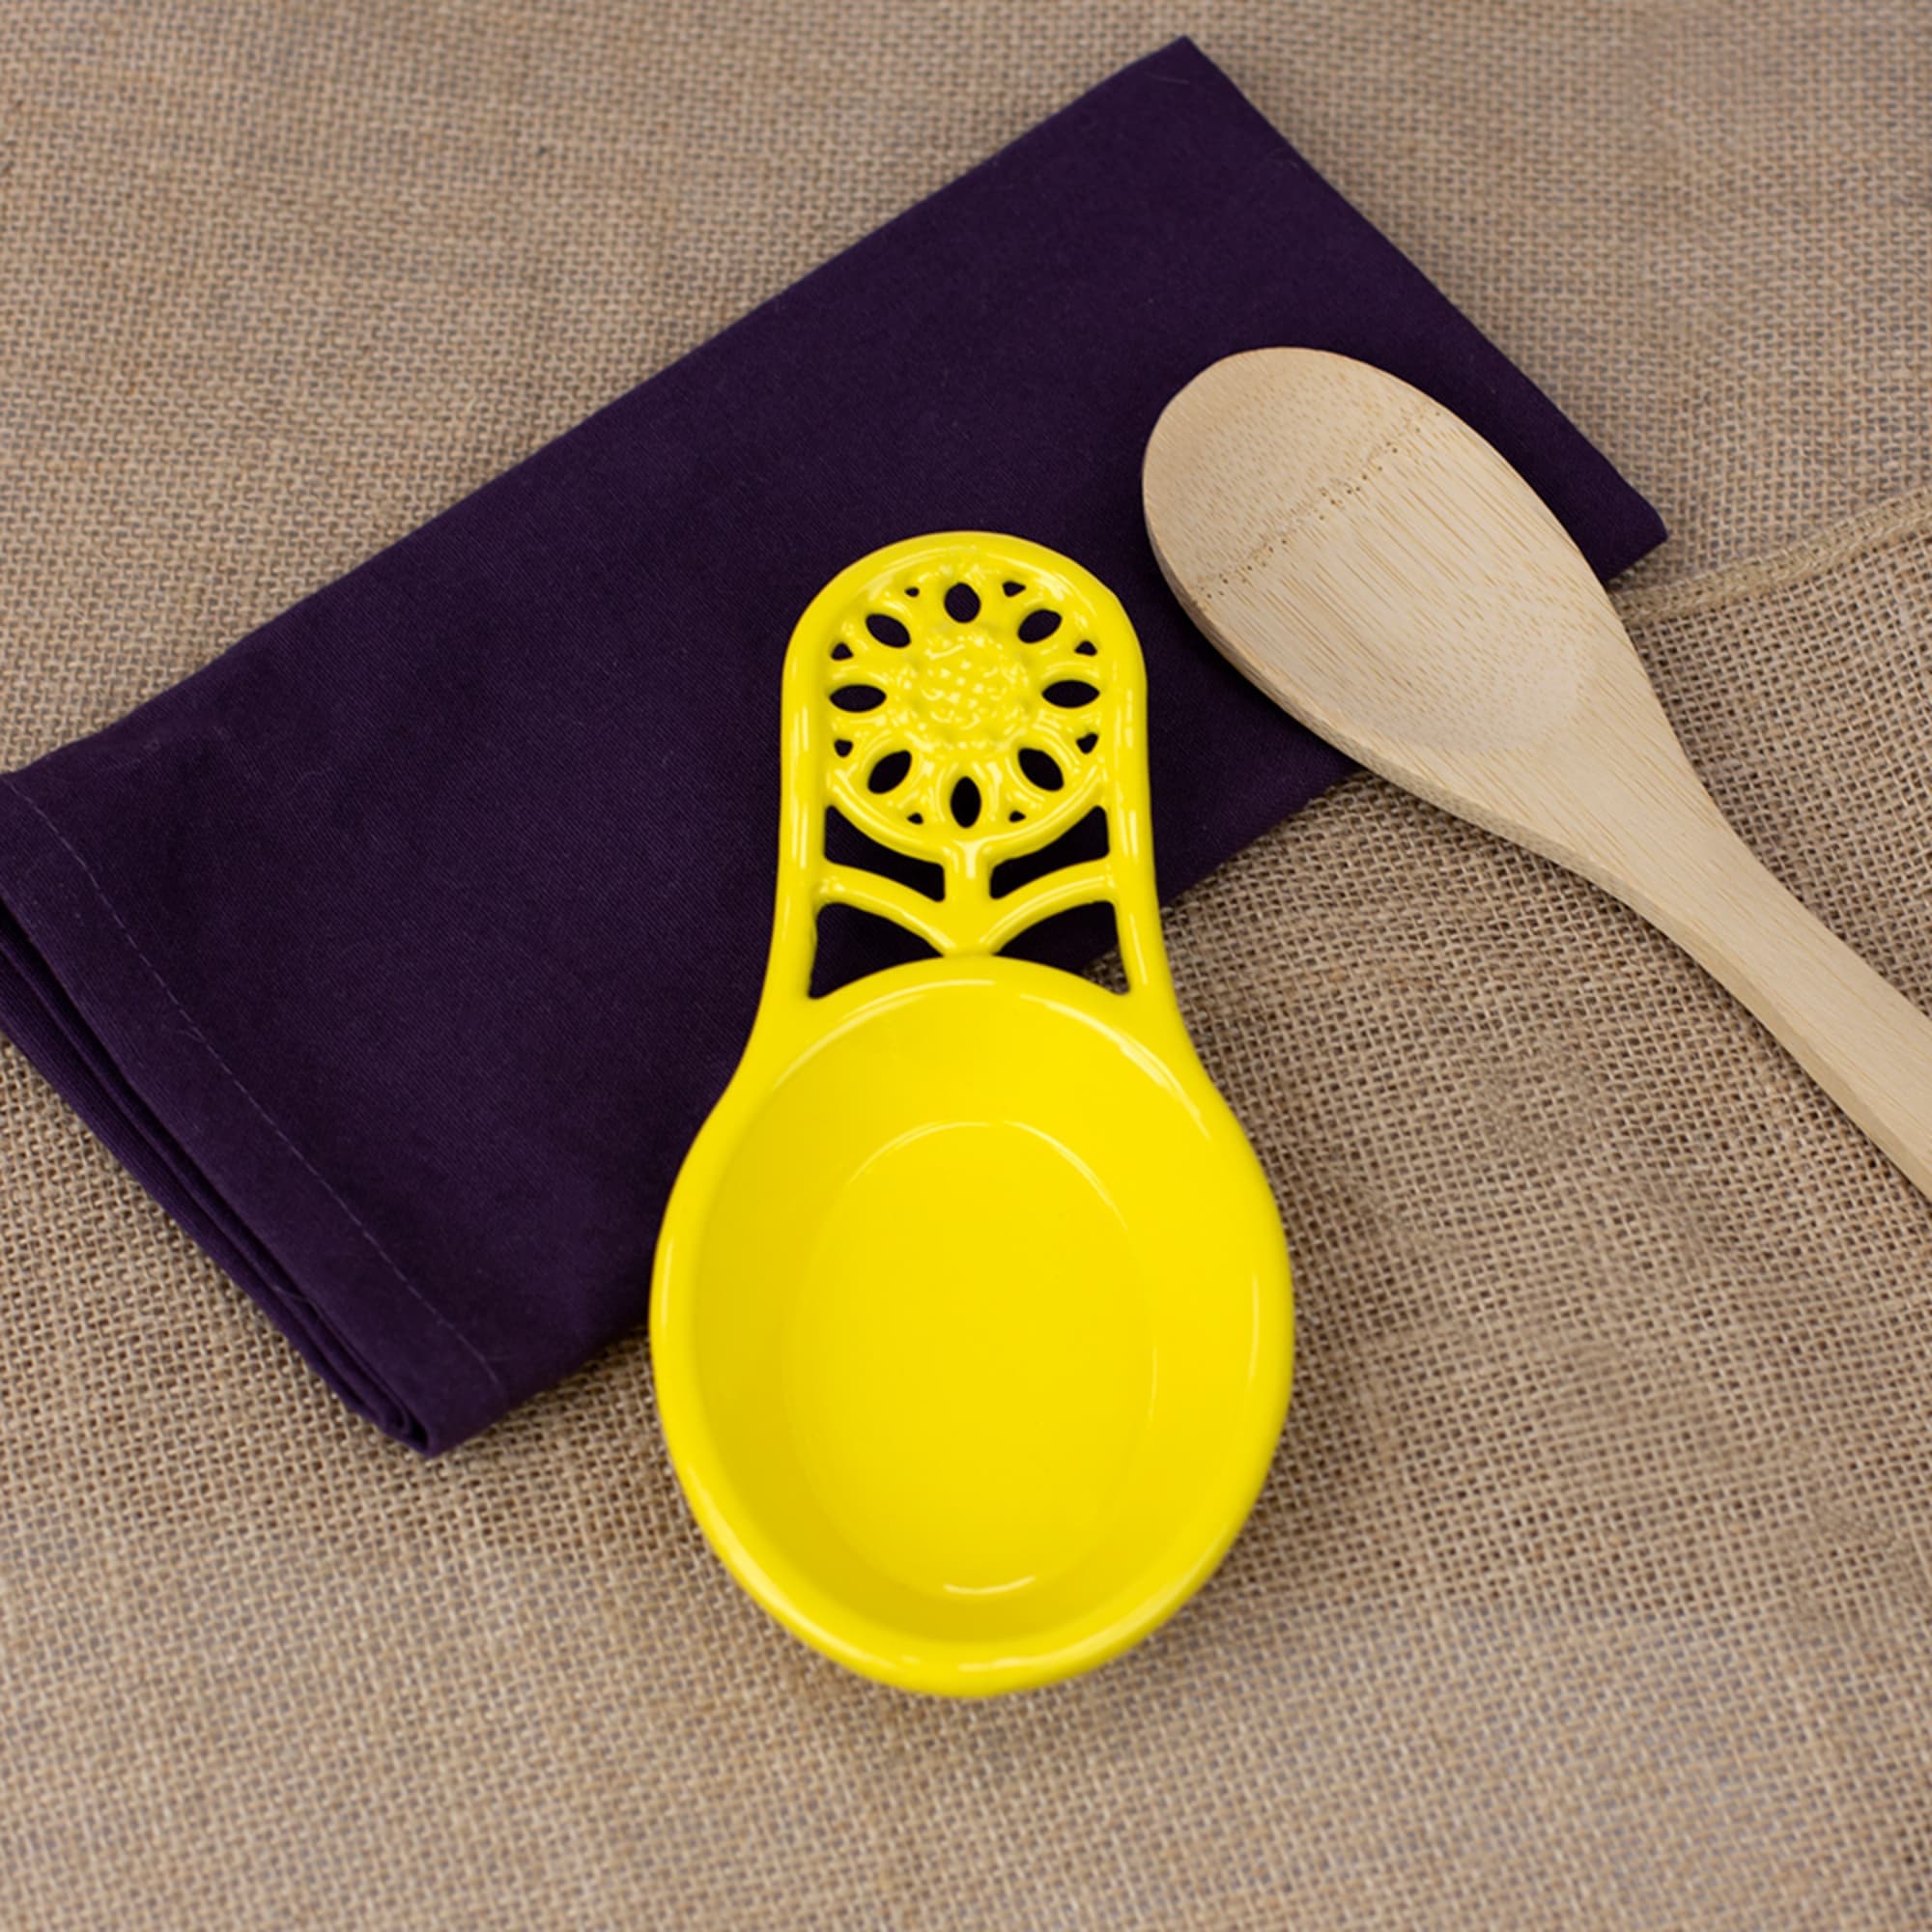 Home Basics Sunflower Heavy Weight Cast Iron Spoon Rest, Yellow $4.00 EACH, CASE PACK OF 6